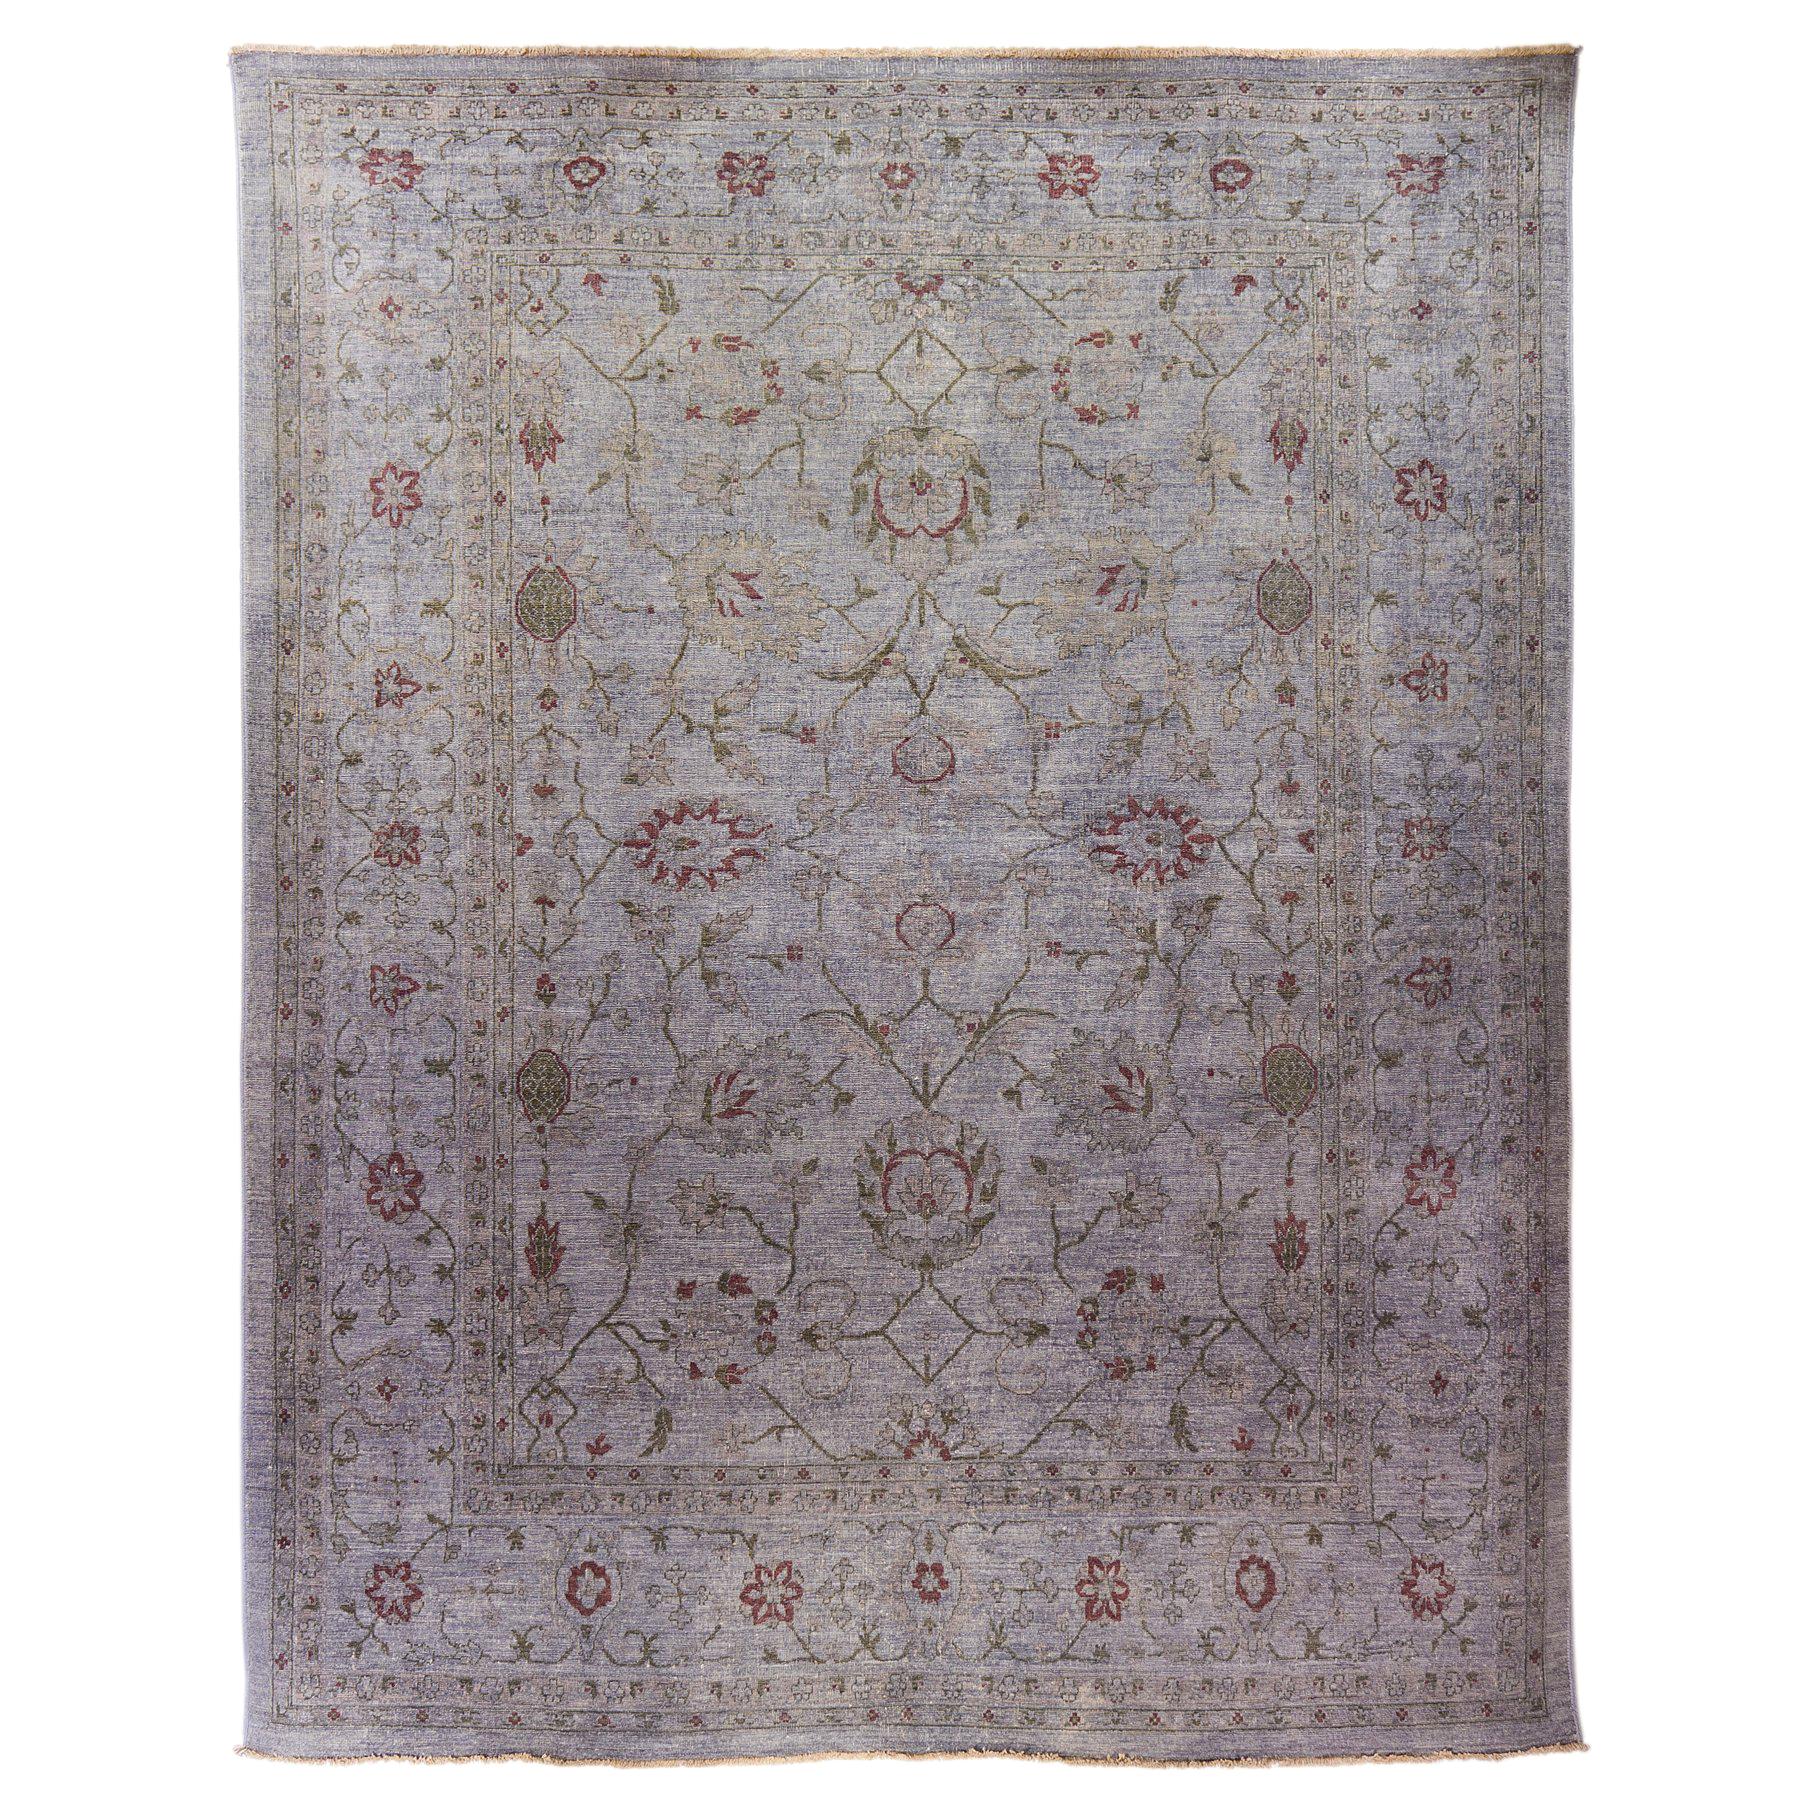 Ziegler Pakistan Large Rug Stone Washed, Wool Hand Knotted Grey Red, circa 2000